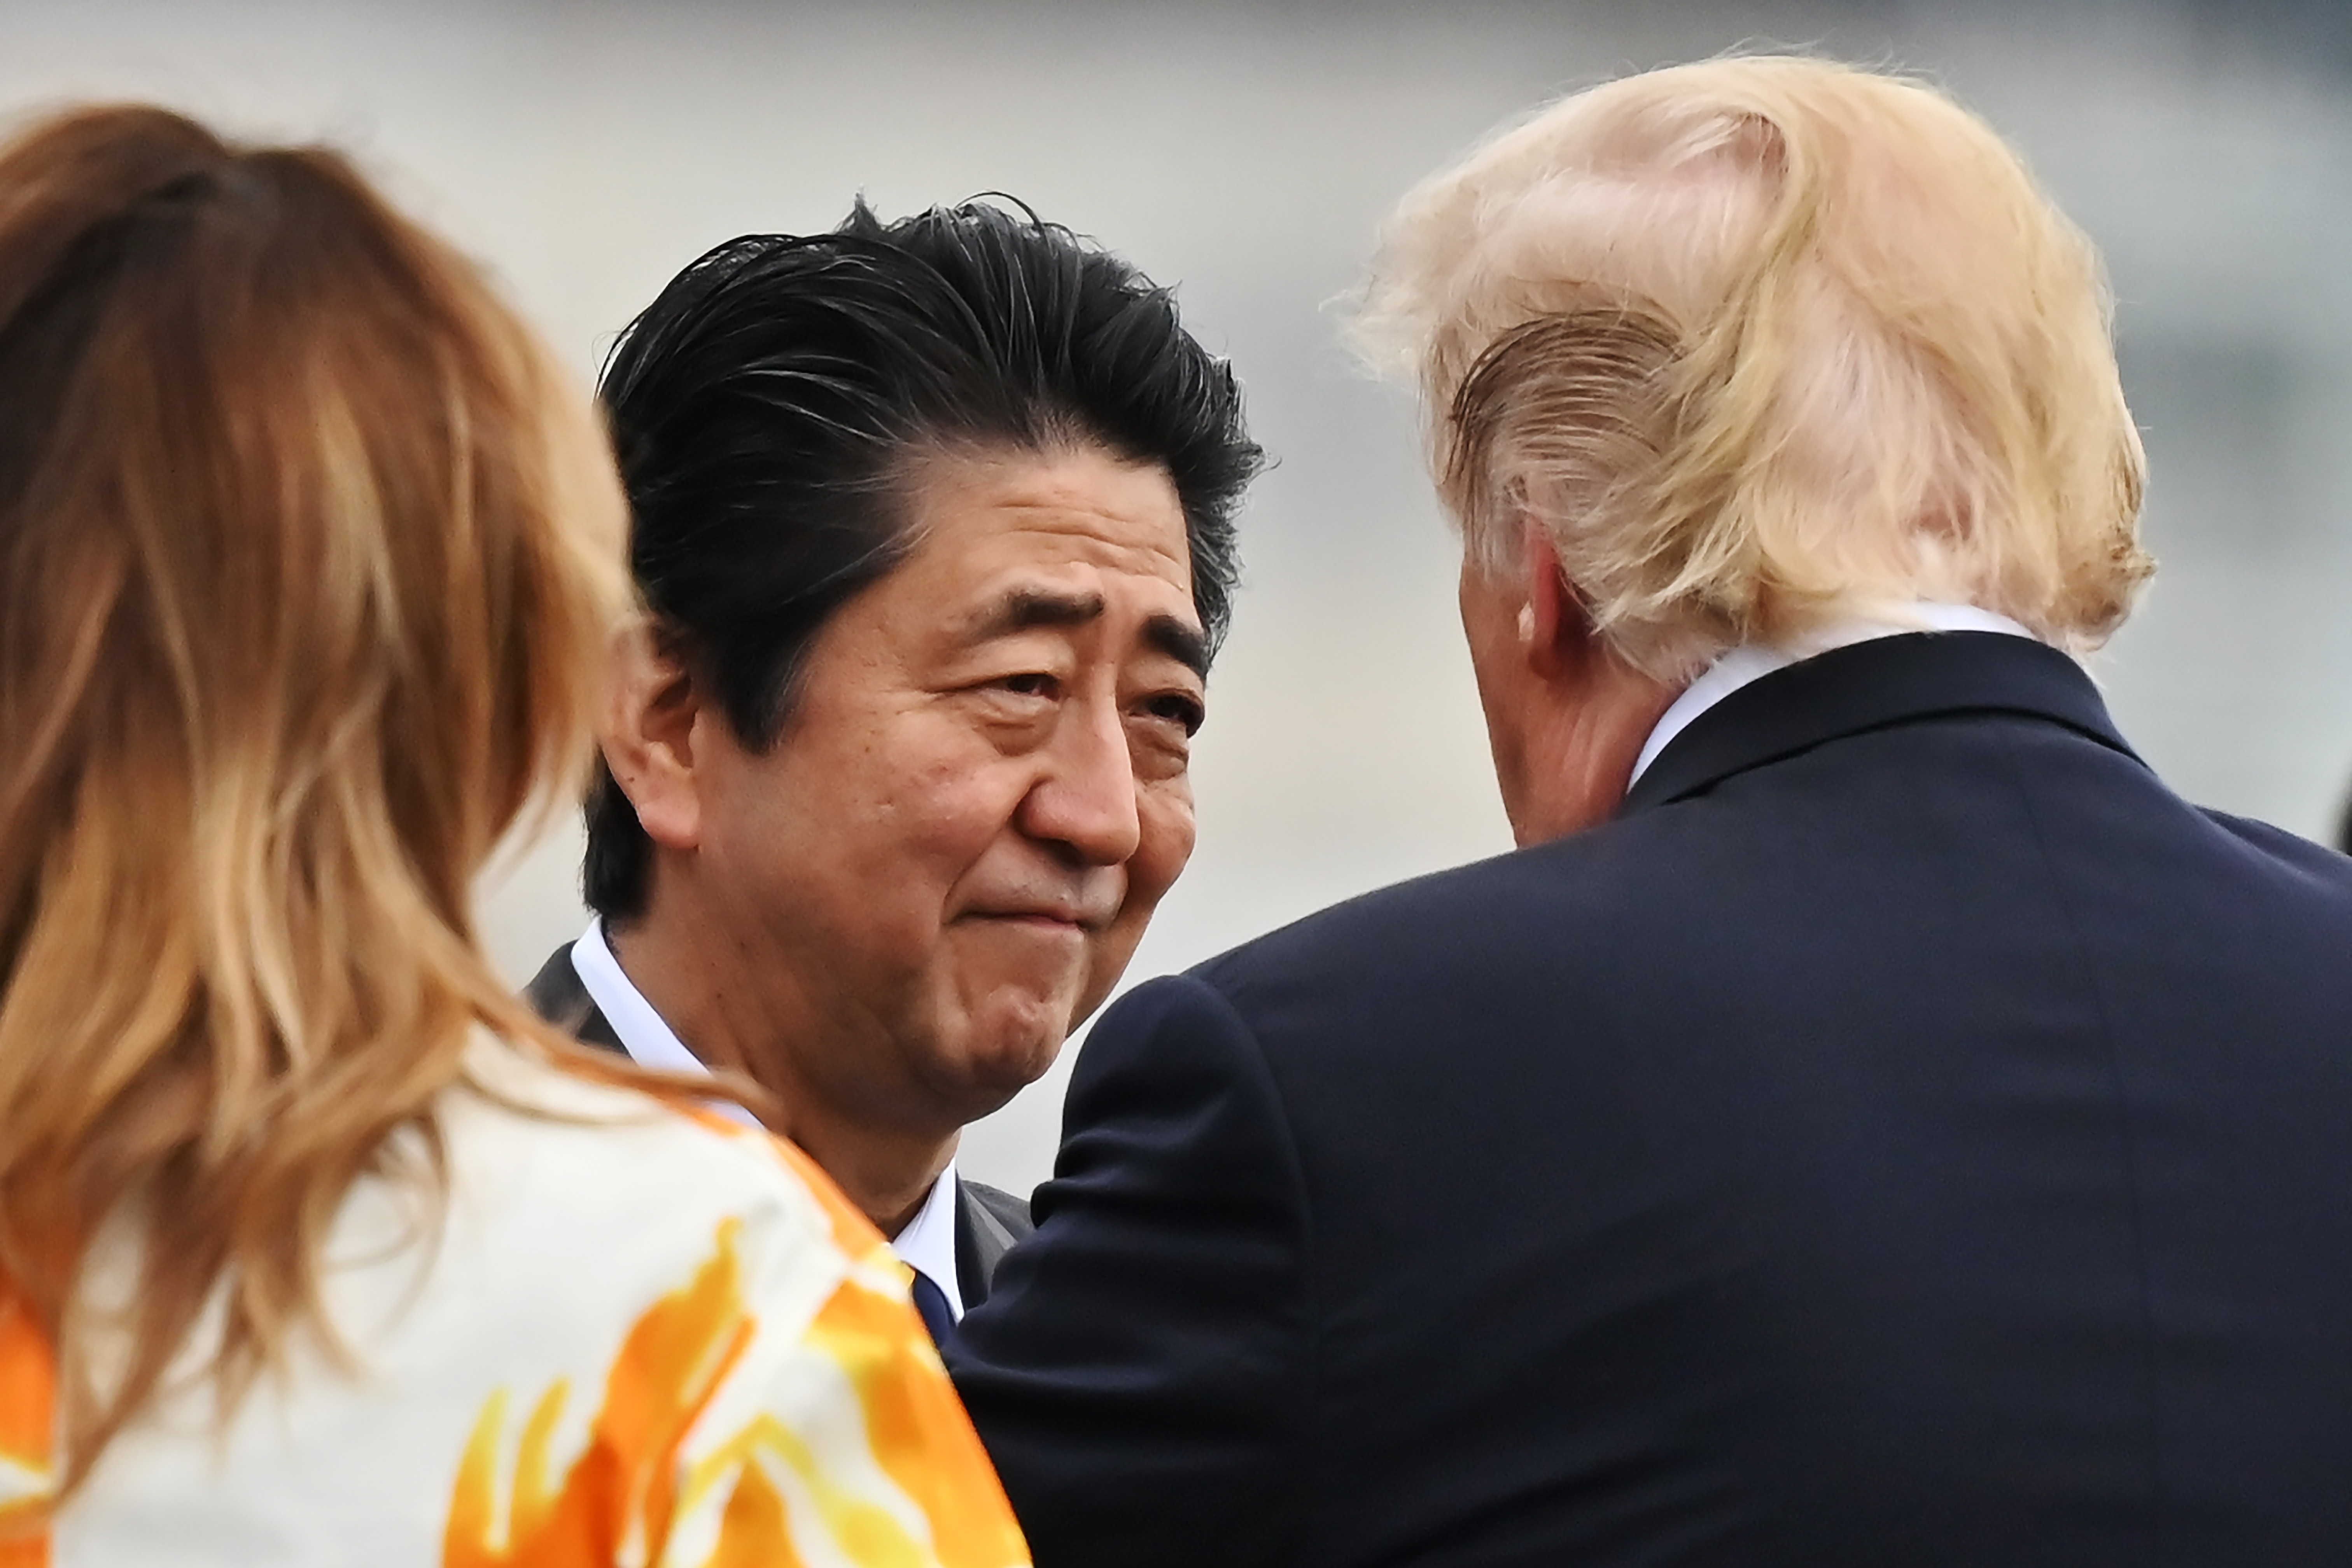 U.S. President Donald Trump, right, talks with Japanese Prime Minister Shinzo Abe, flanked by First Lady Melania Trump, left, onboard the Japanese destroyer JS Kaga, in Yokosuka, south of Tokyo Tuesday, May 28, 2019.(Charly Triballeau/Pool Photo via AP)